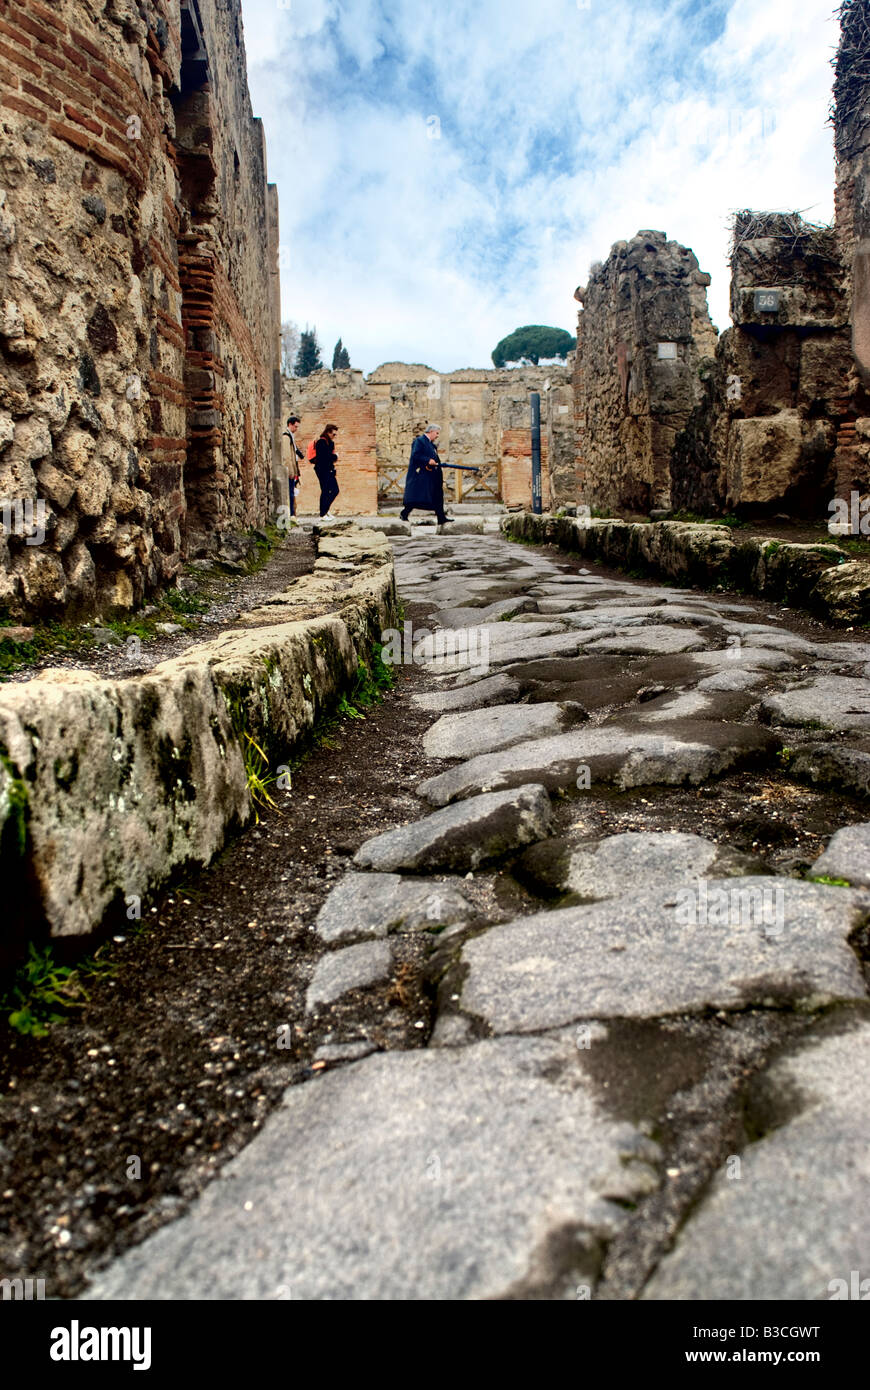 Ancient Paved Road With Carriage Wheel Ruts. Pompeii Italy Stock Photo